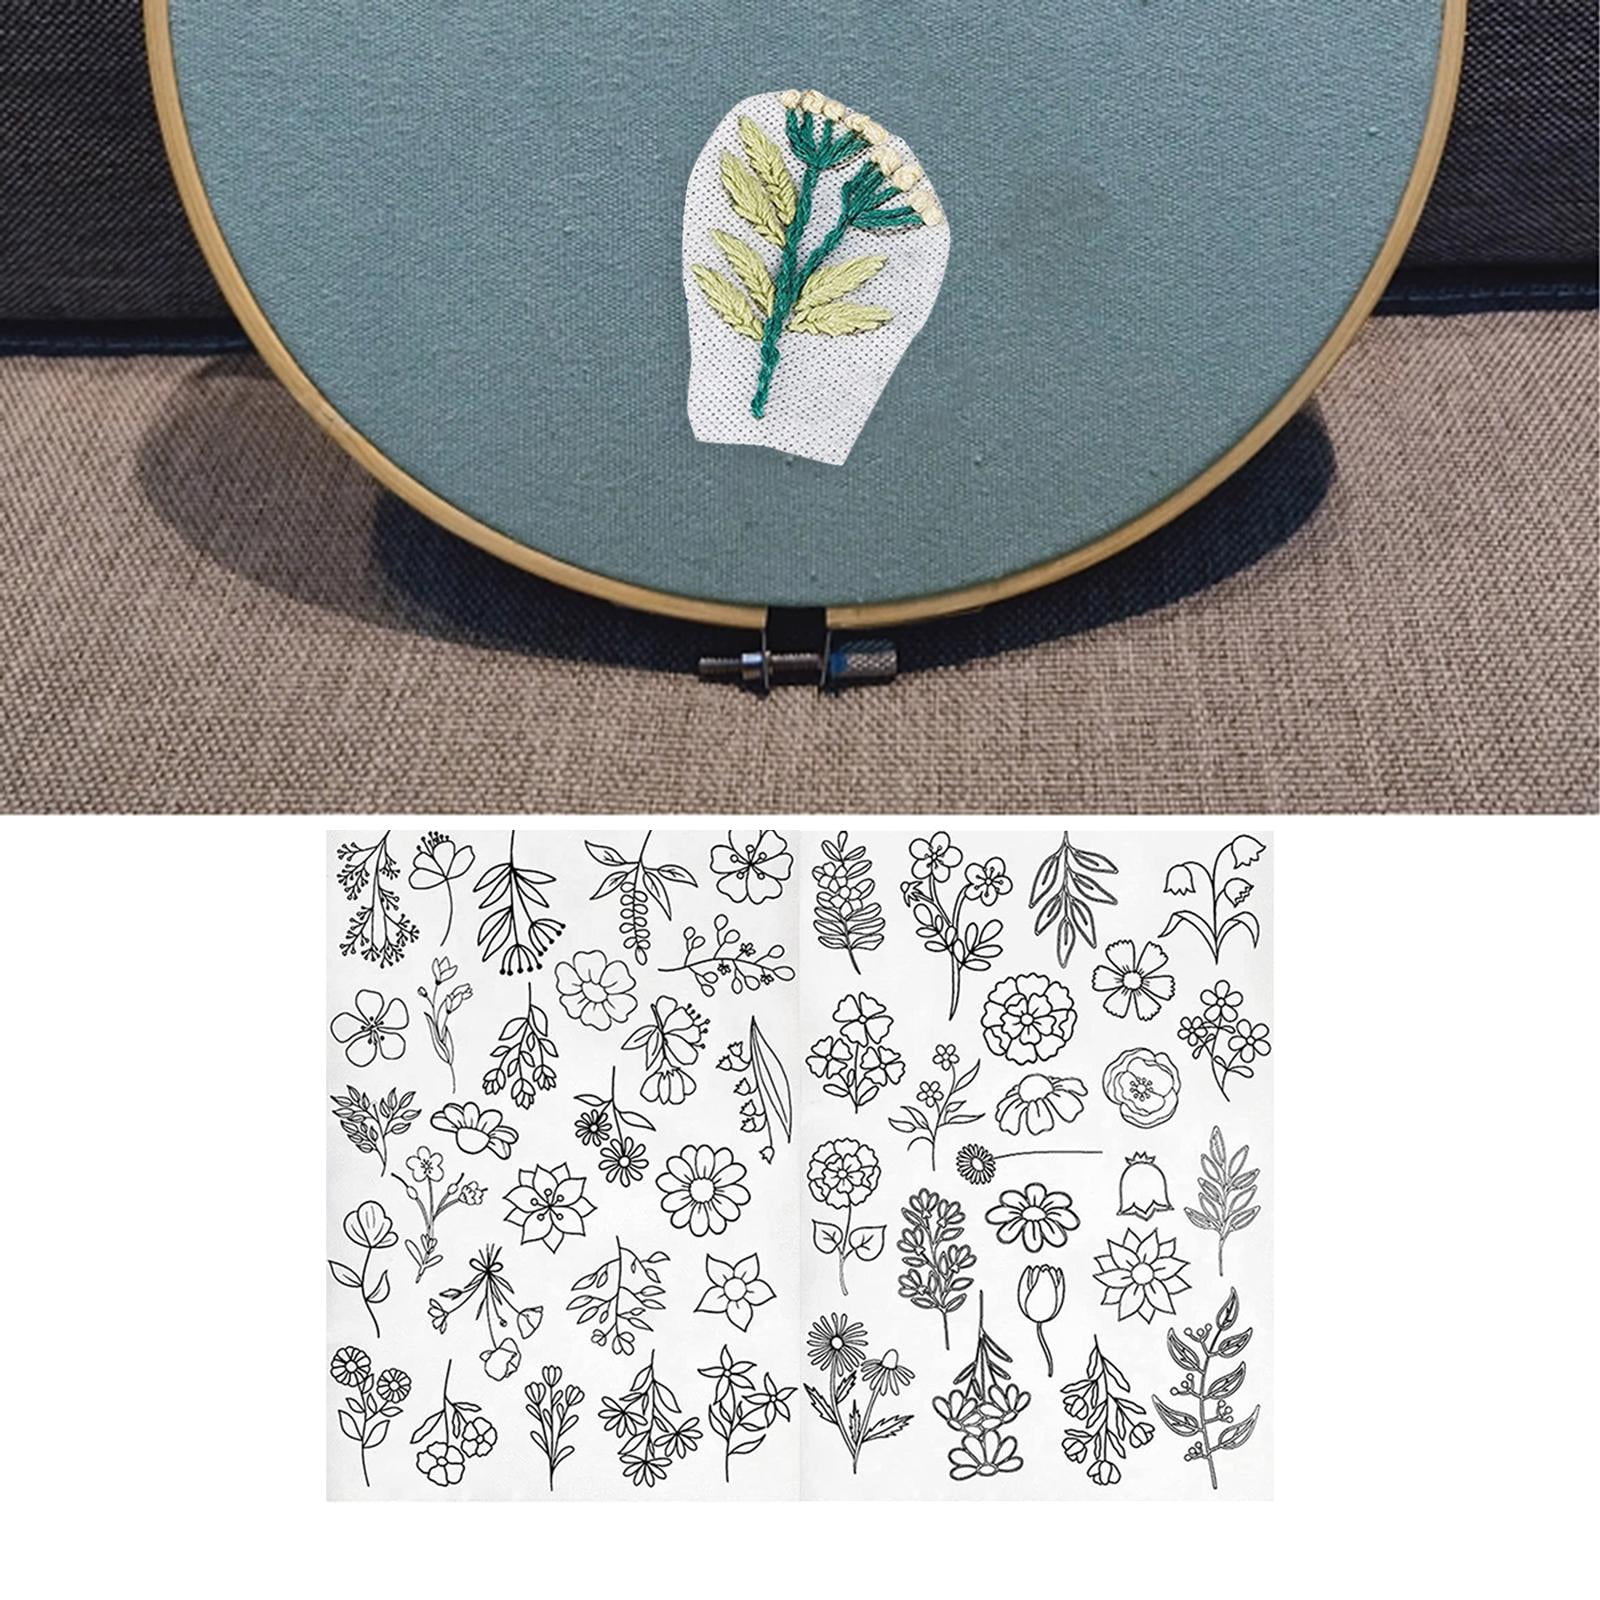 75 Pcs Water Soluble Embroidery Patterns, 3 Template Sheet Embroidery Patterns Transfers Stabilizer, Peel and Stick Embroidery Floral Patterns